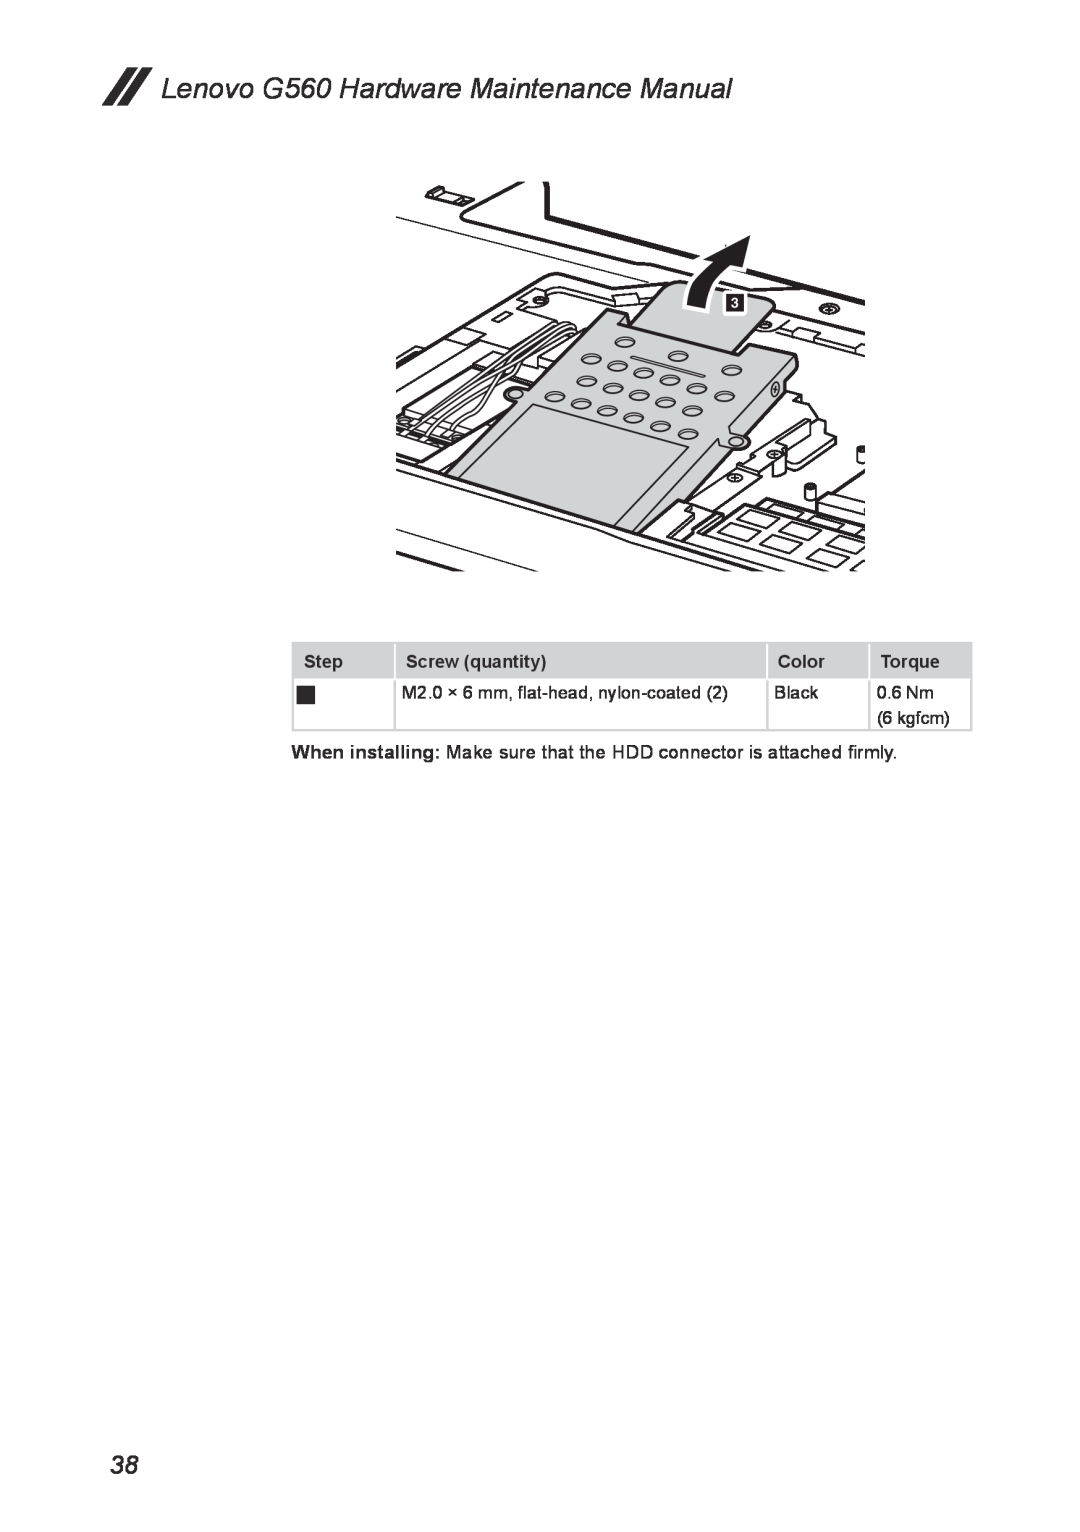 Lenovo Lenovo G560 Hardware Maintenance Manual, When installing Make sure that the HDD connector is attached firmly 